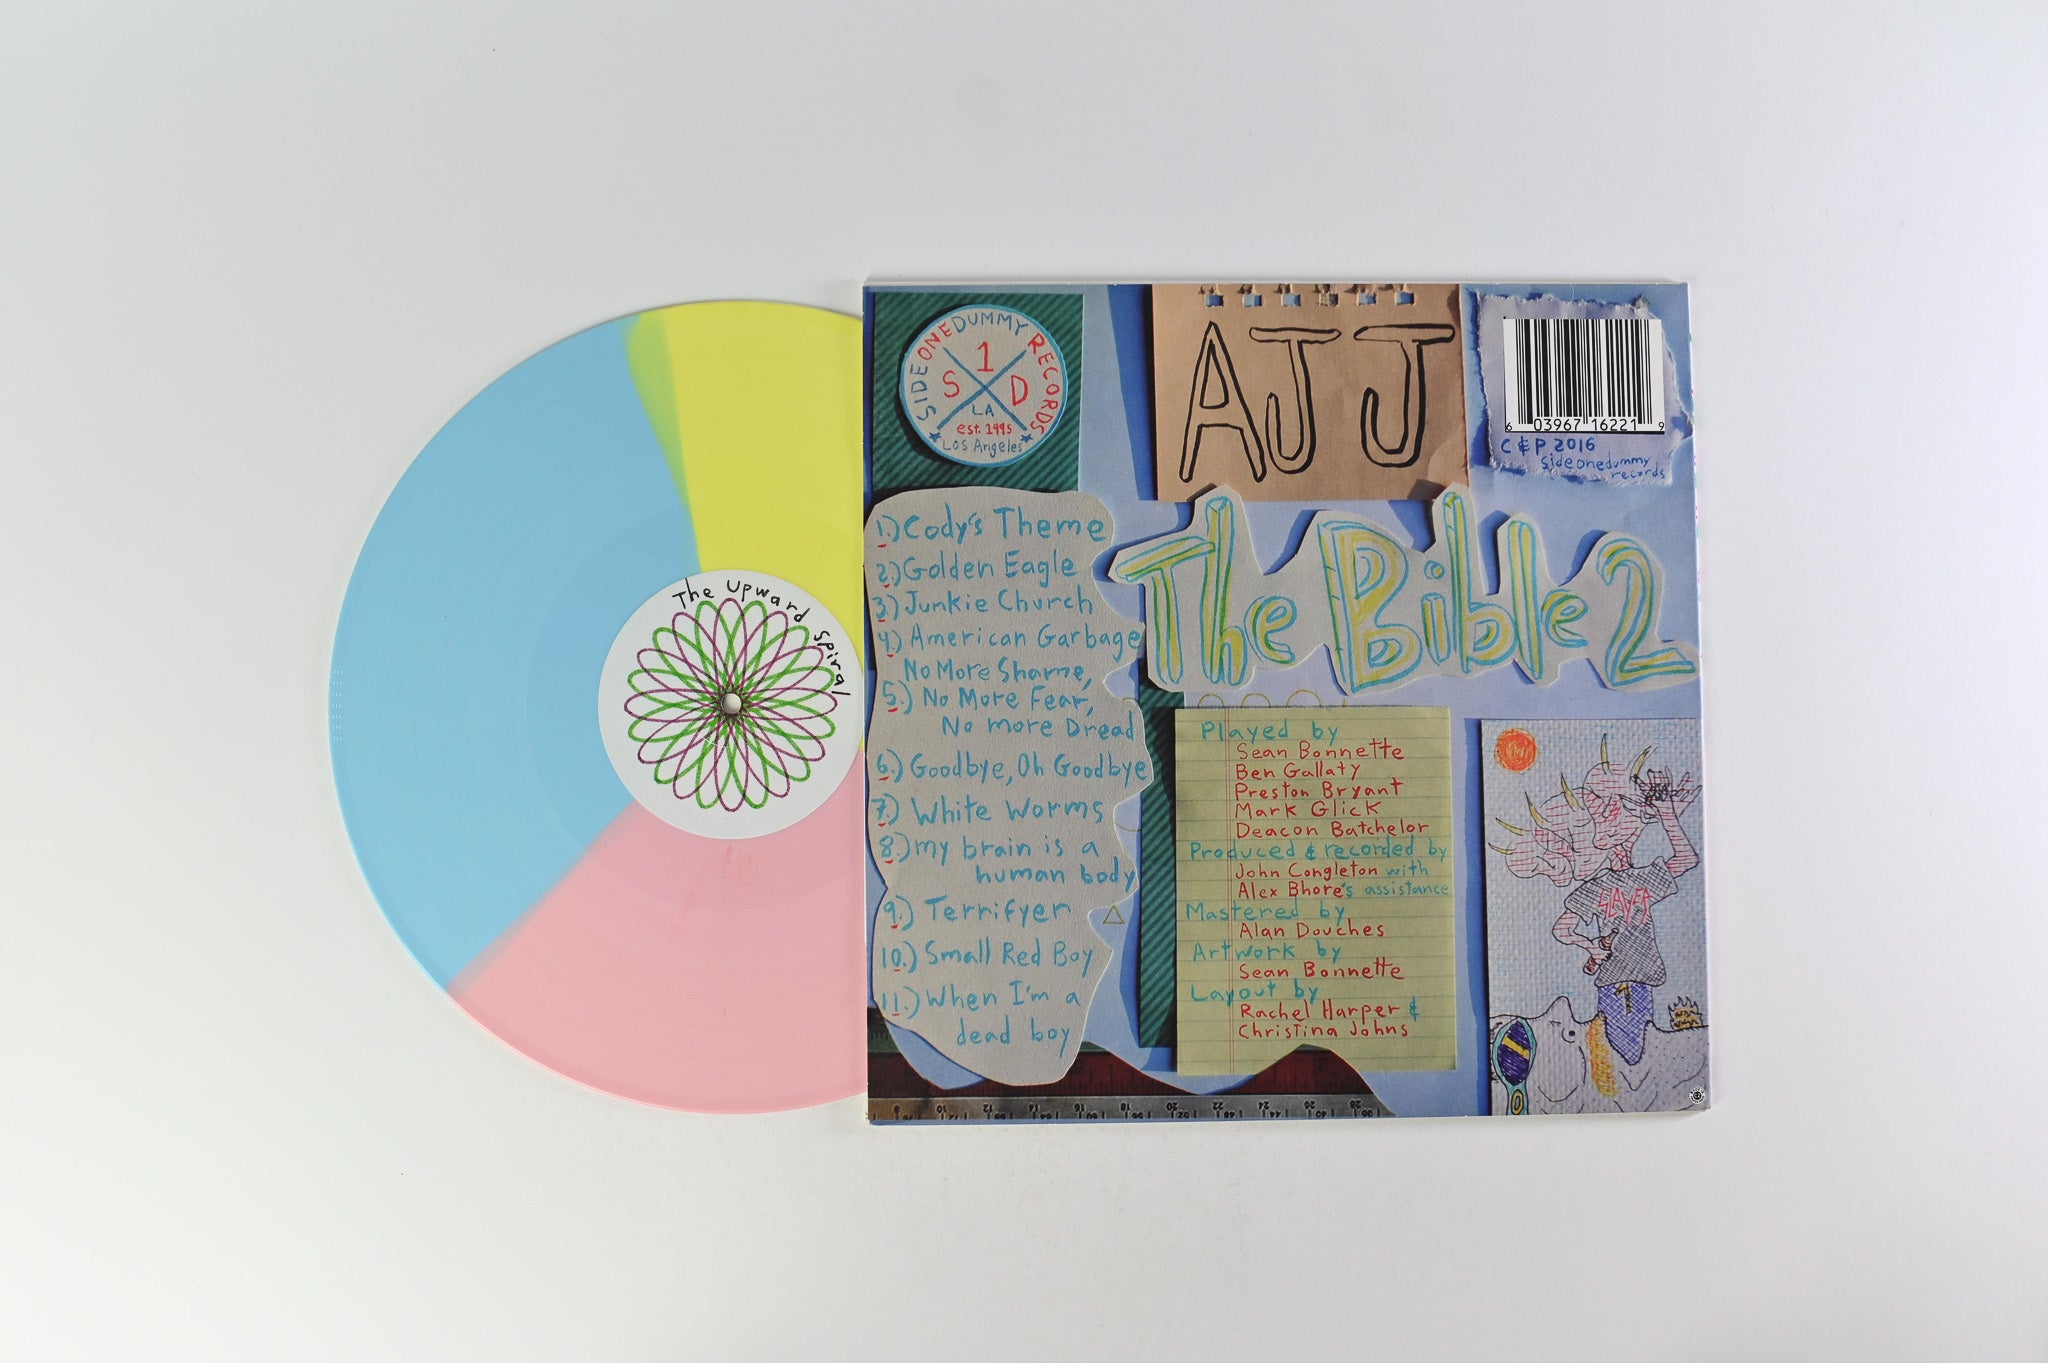 AJJ - The Bible 2 on SideOneDummy Tri Color Vinyl